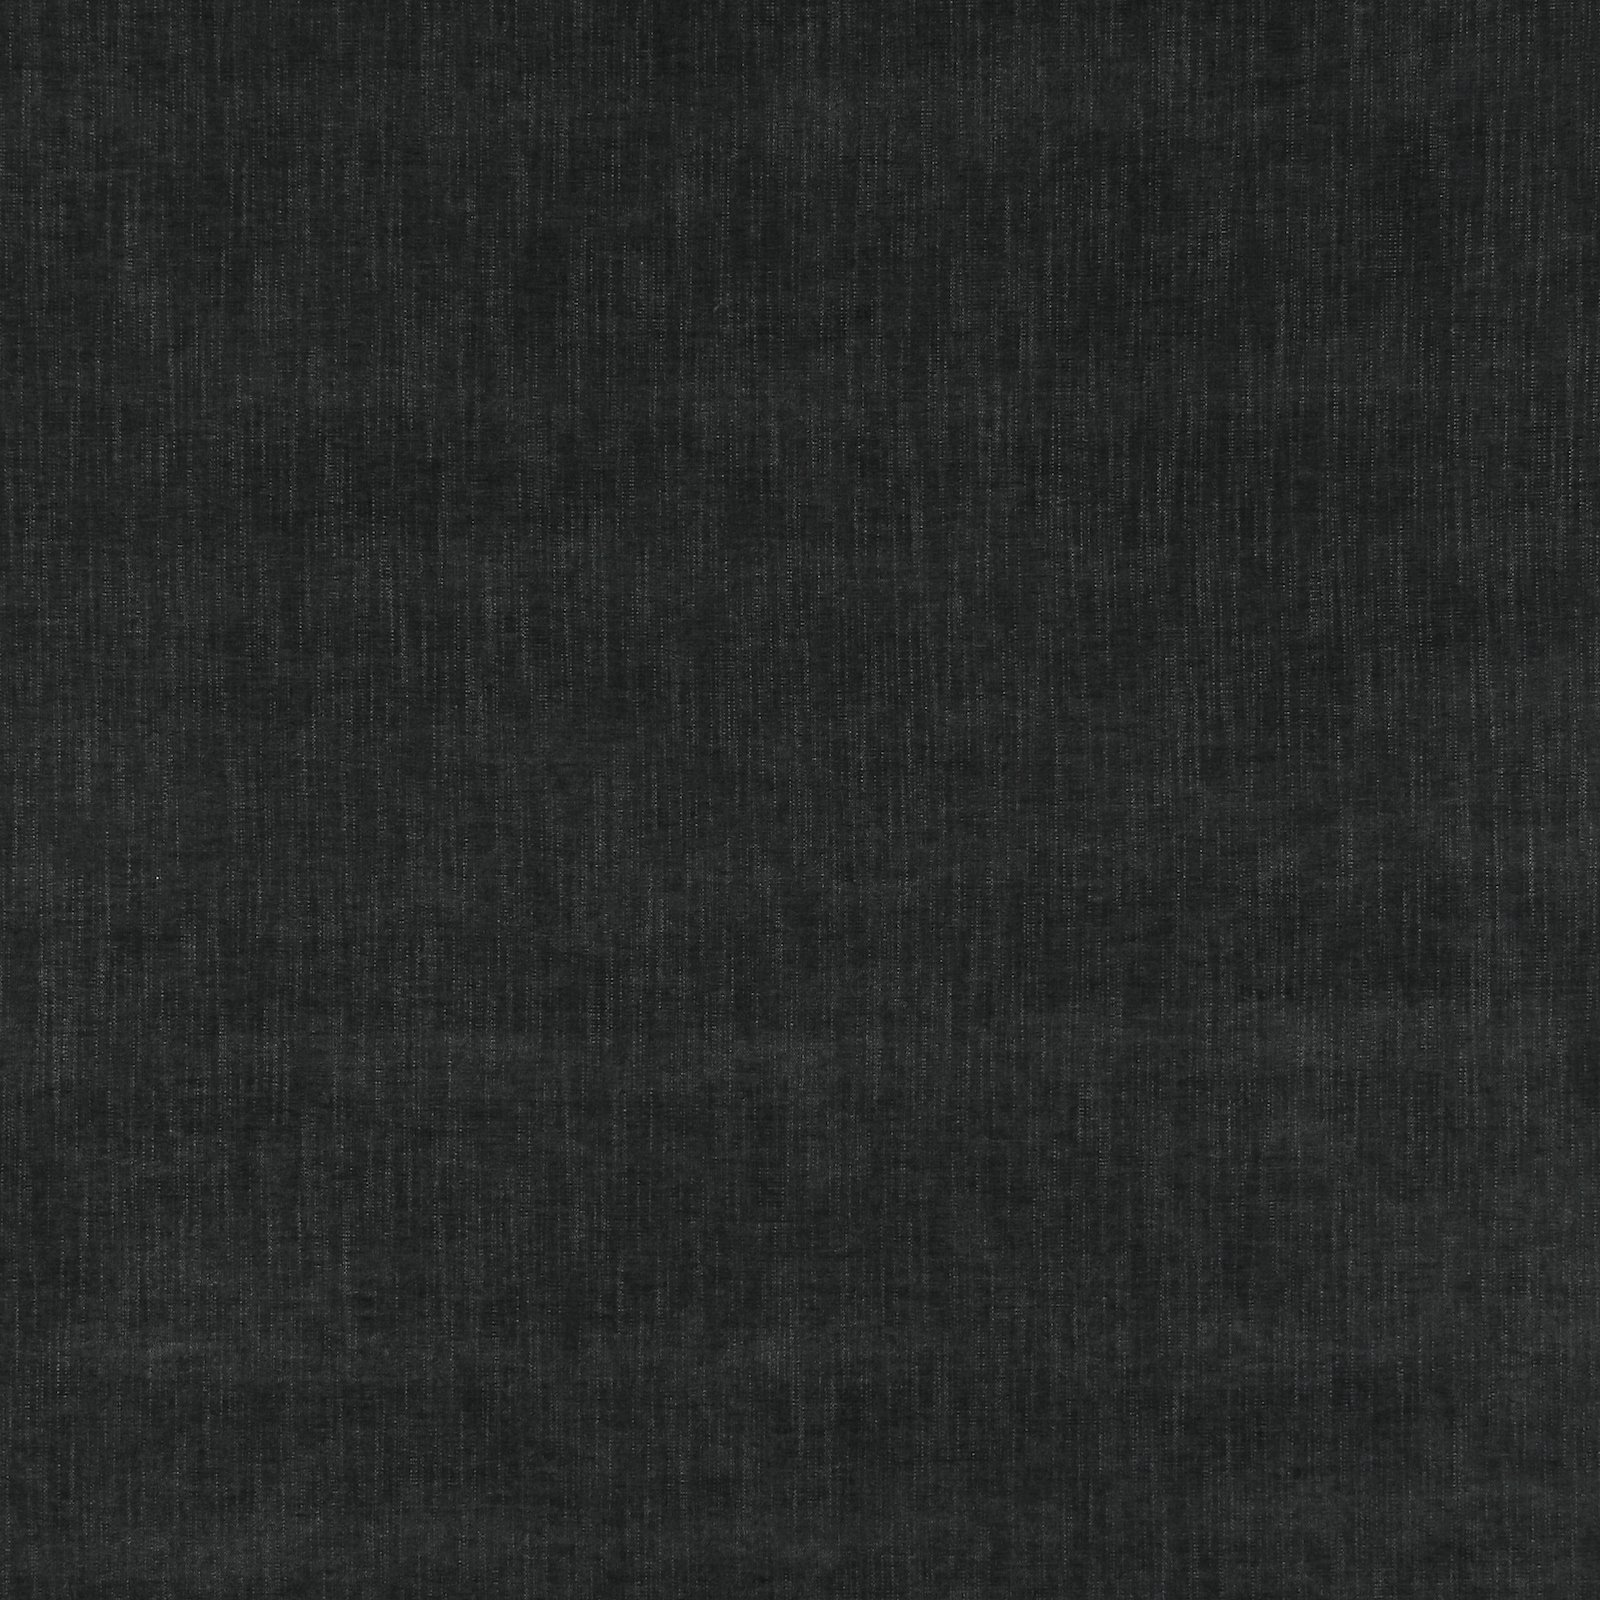 Upholstery chenille structure dark grey 824173_pack_solid